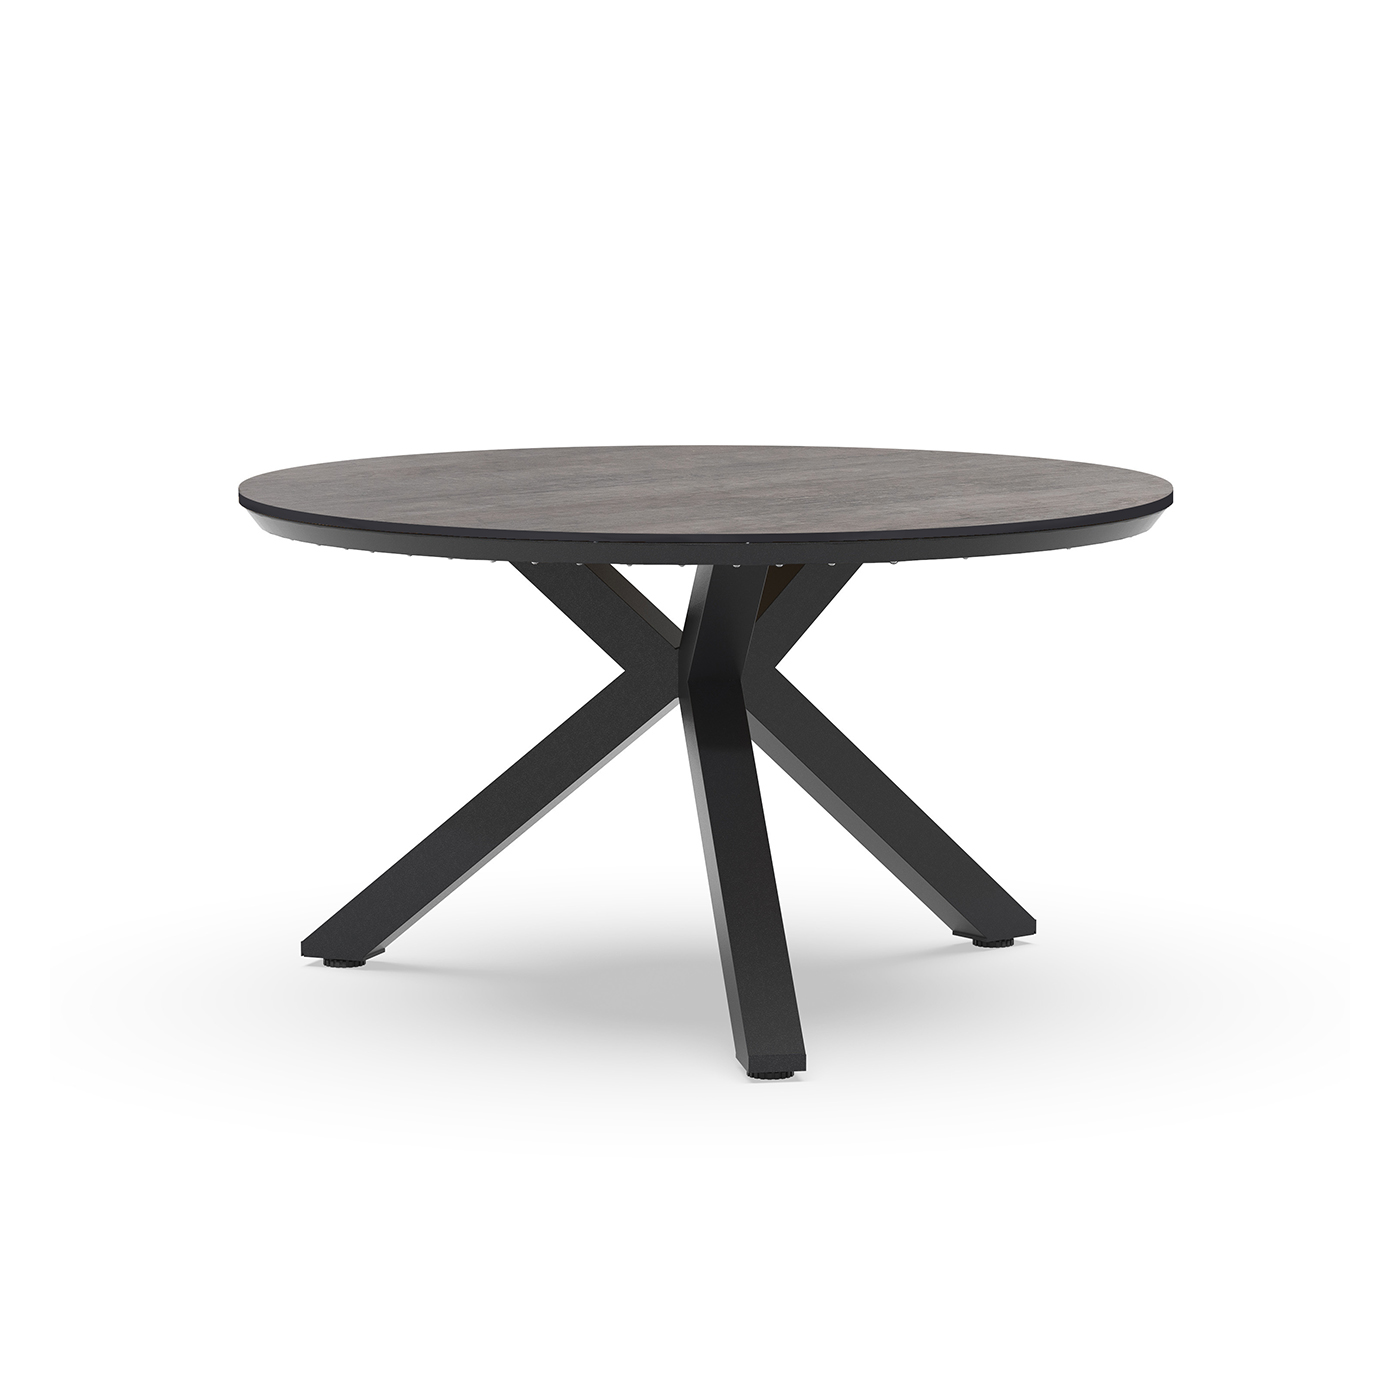 Orbital Low Dining Table Trespa Forest Grey 120 cm Ø Charcoal